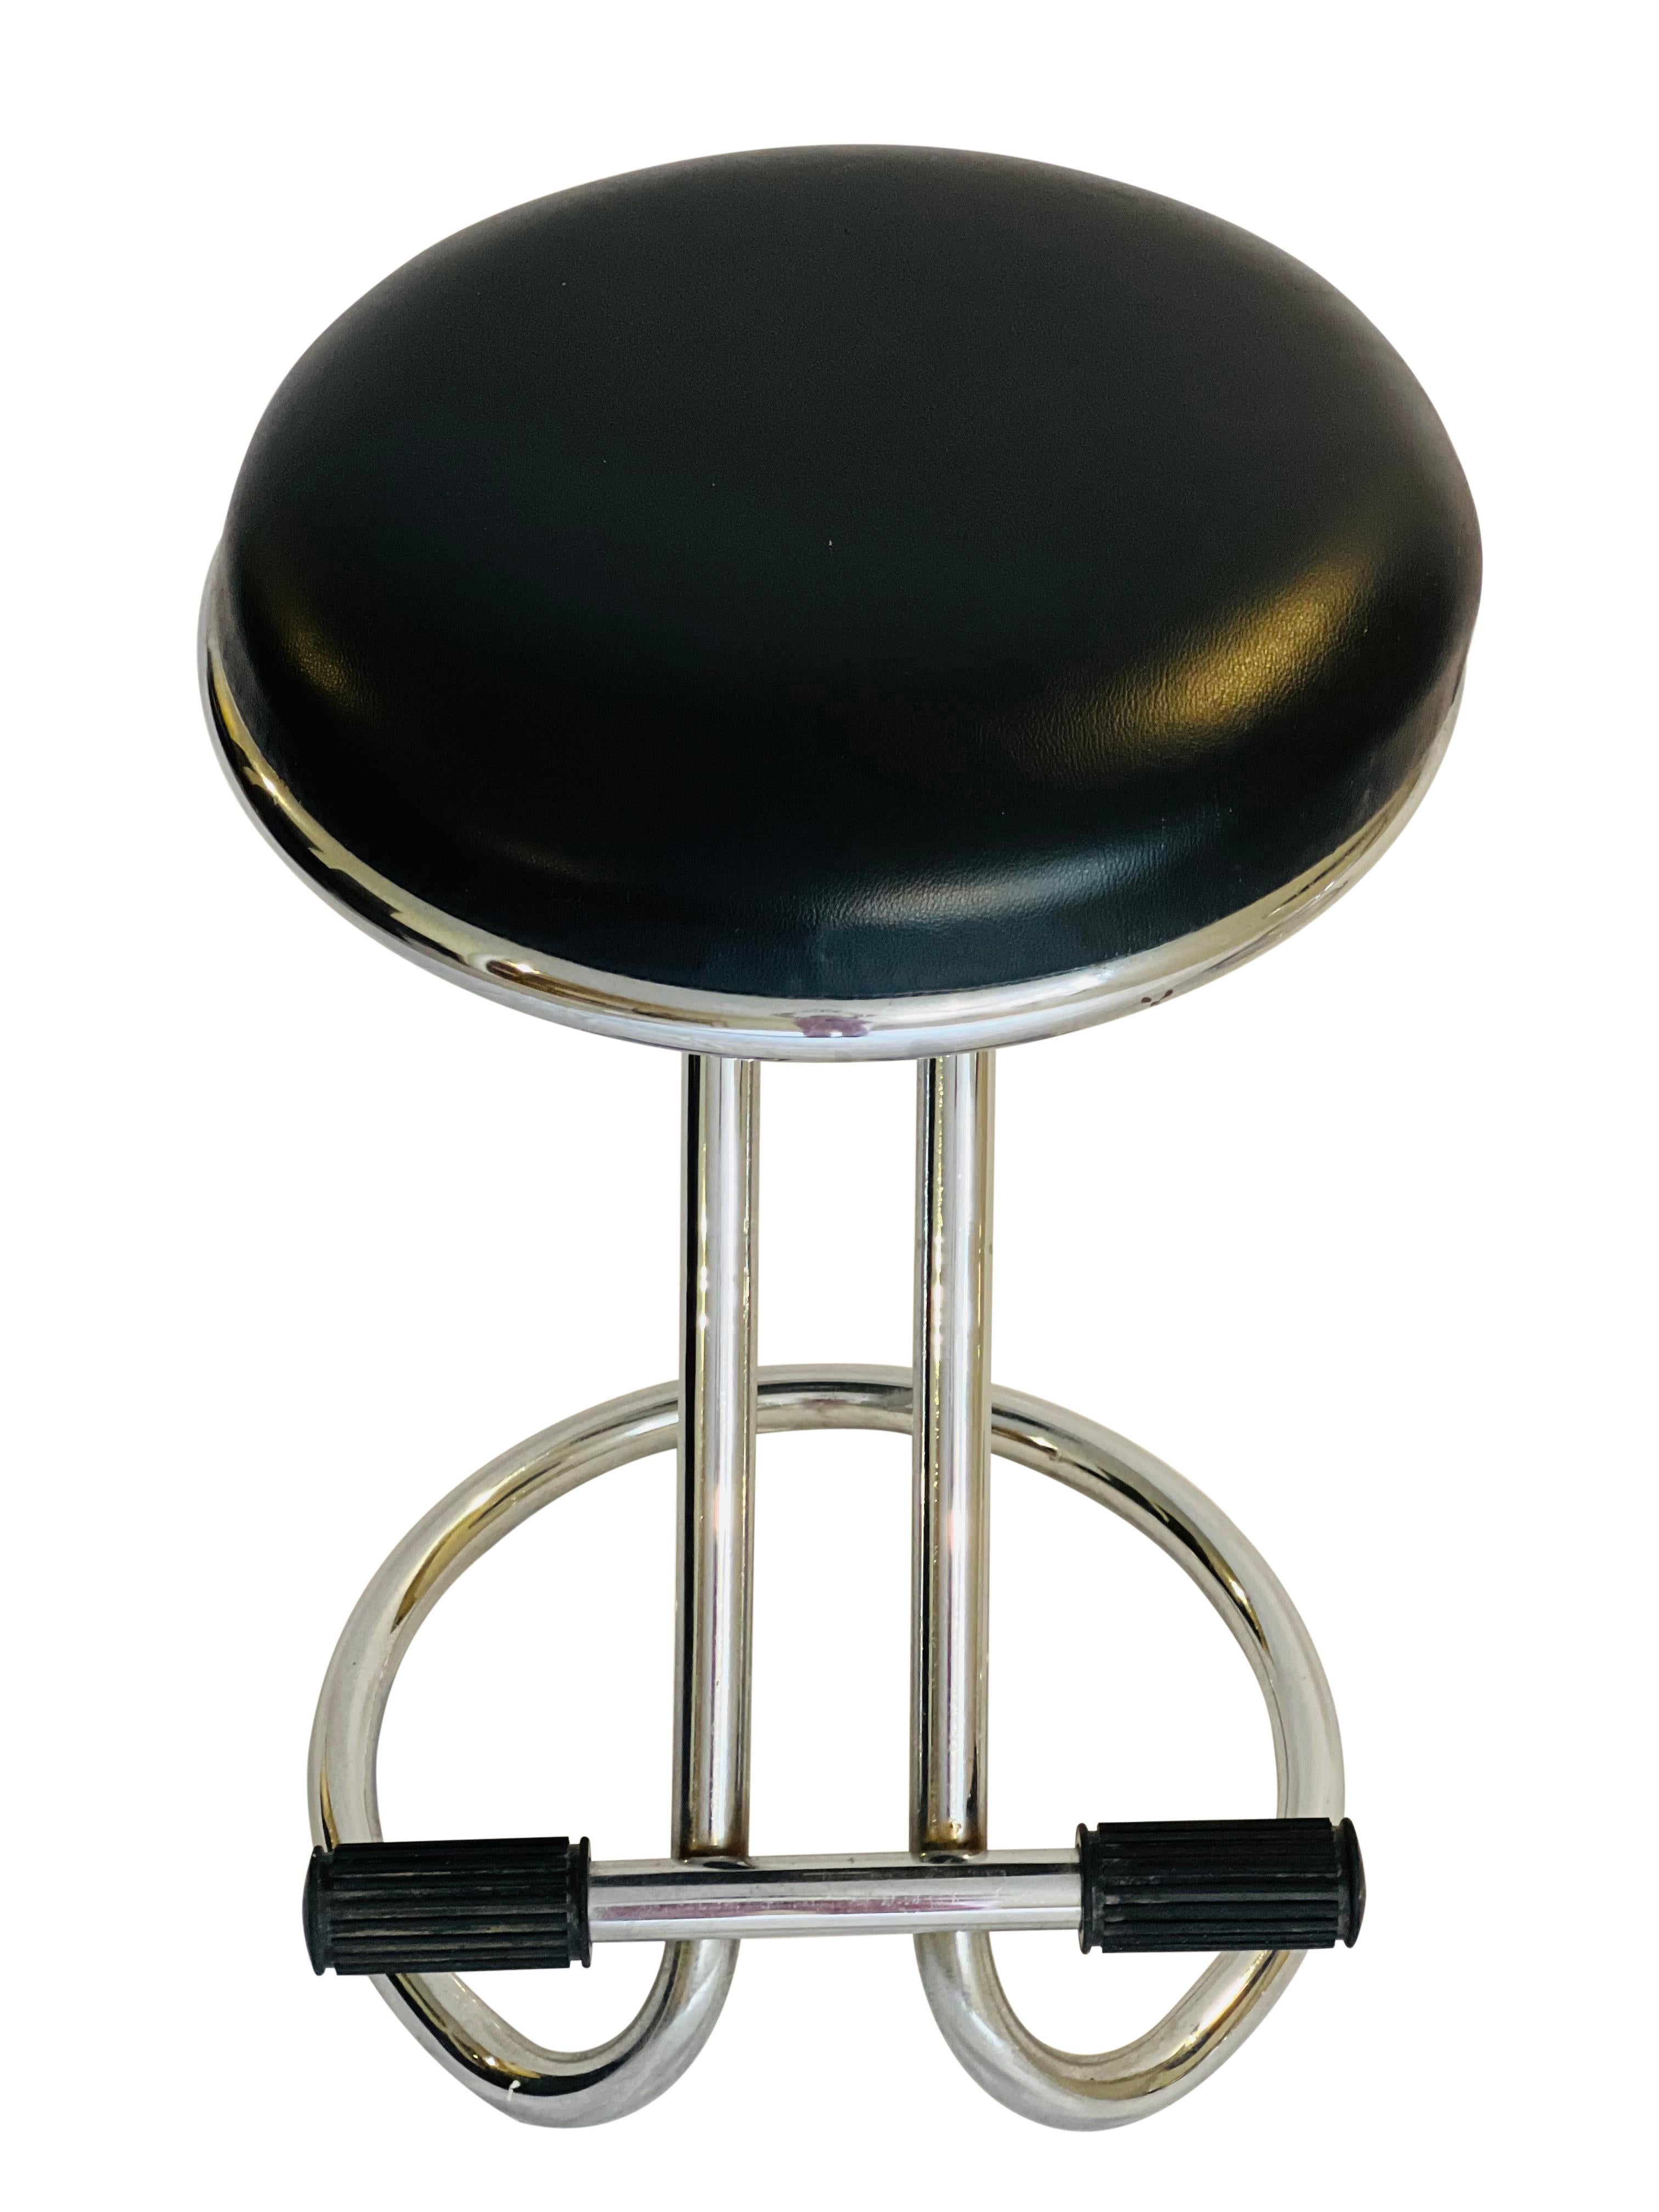 Late 20th Century Vintage Italian Chrome Counter Stools by Bieffeplast, a Pair